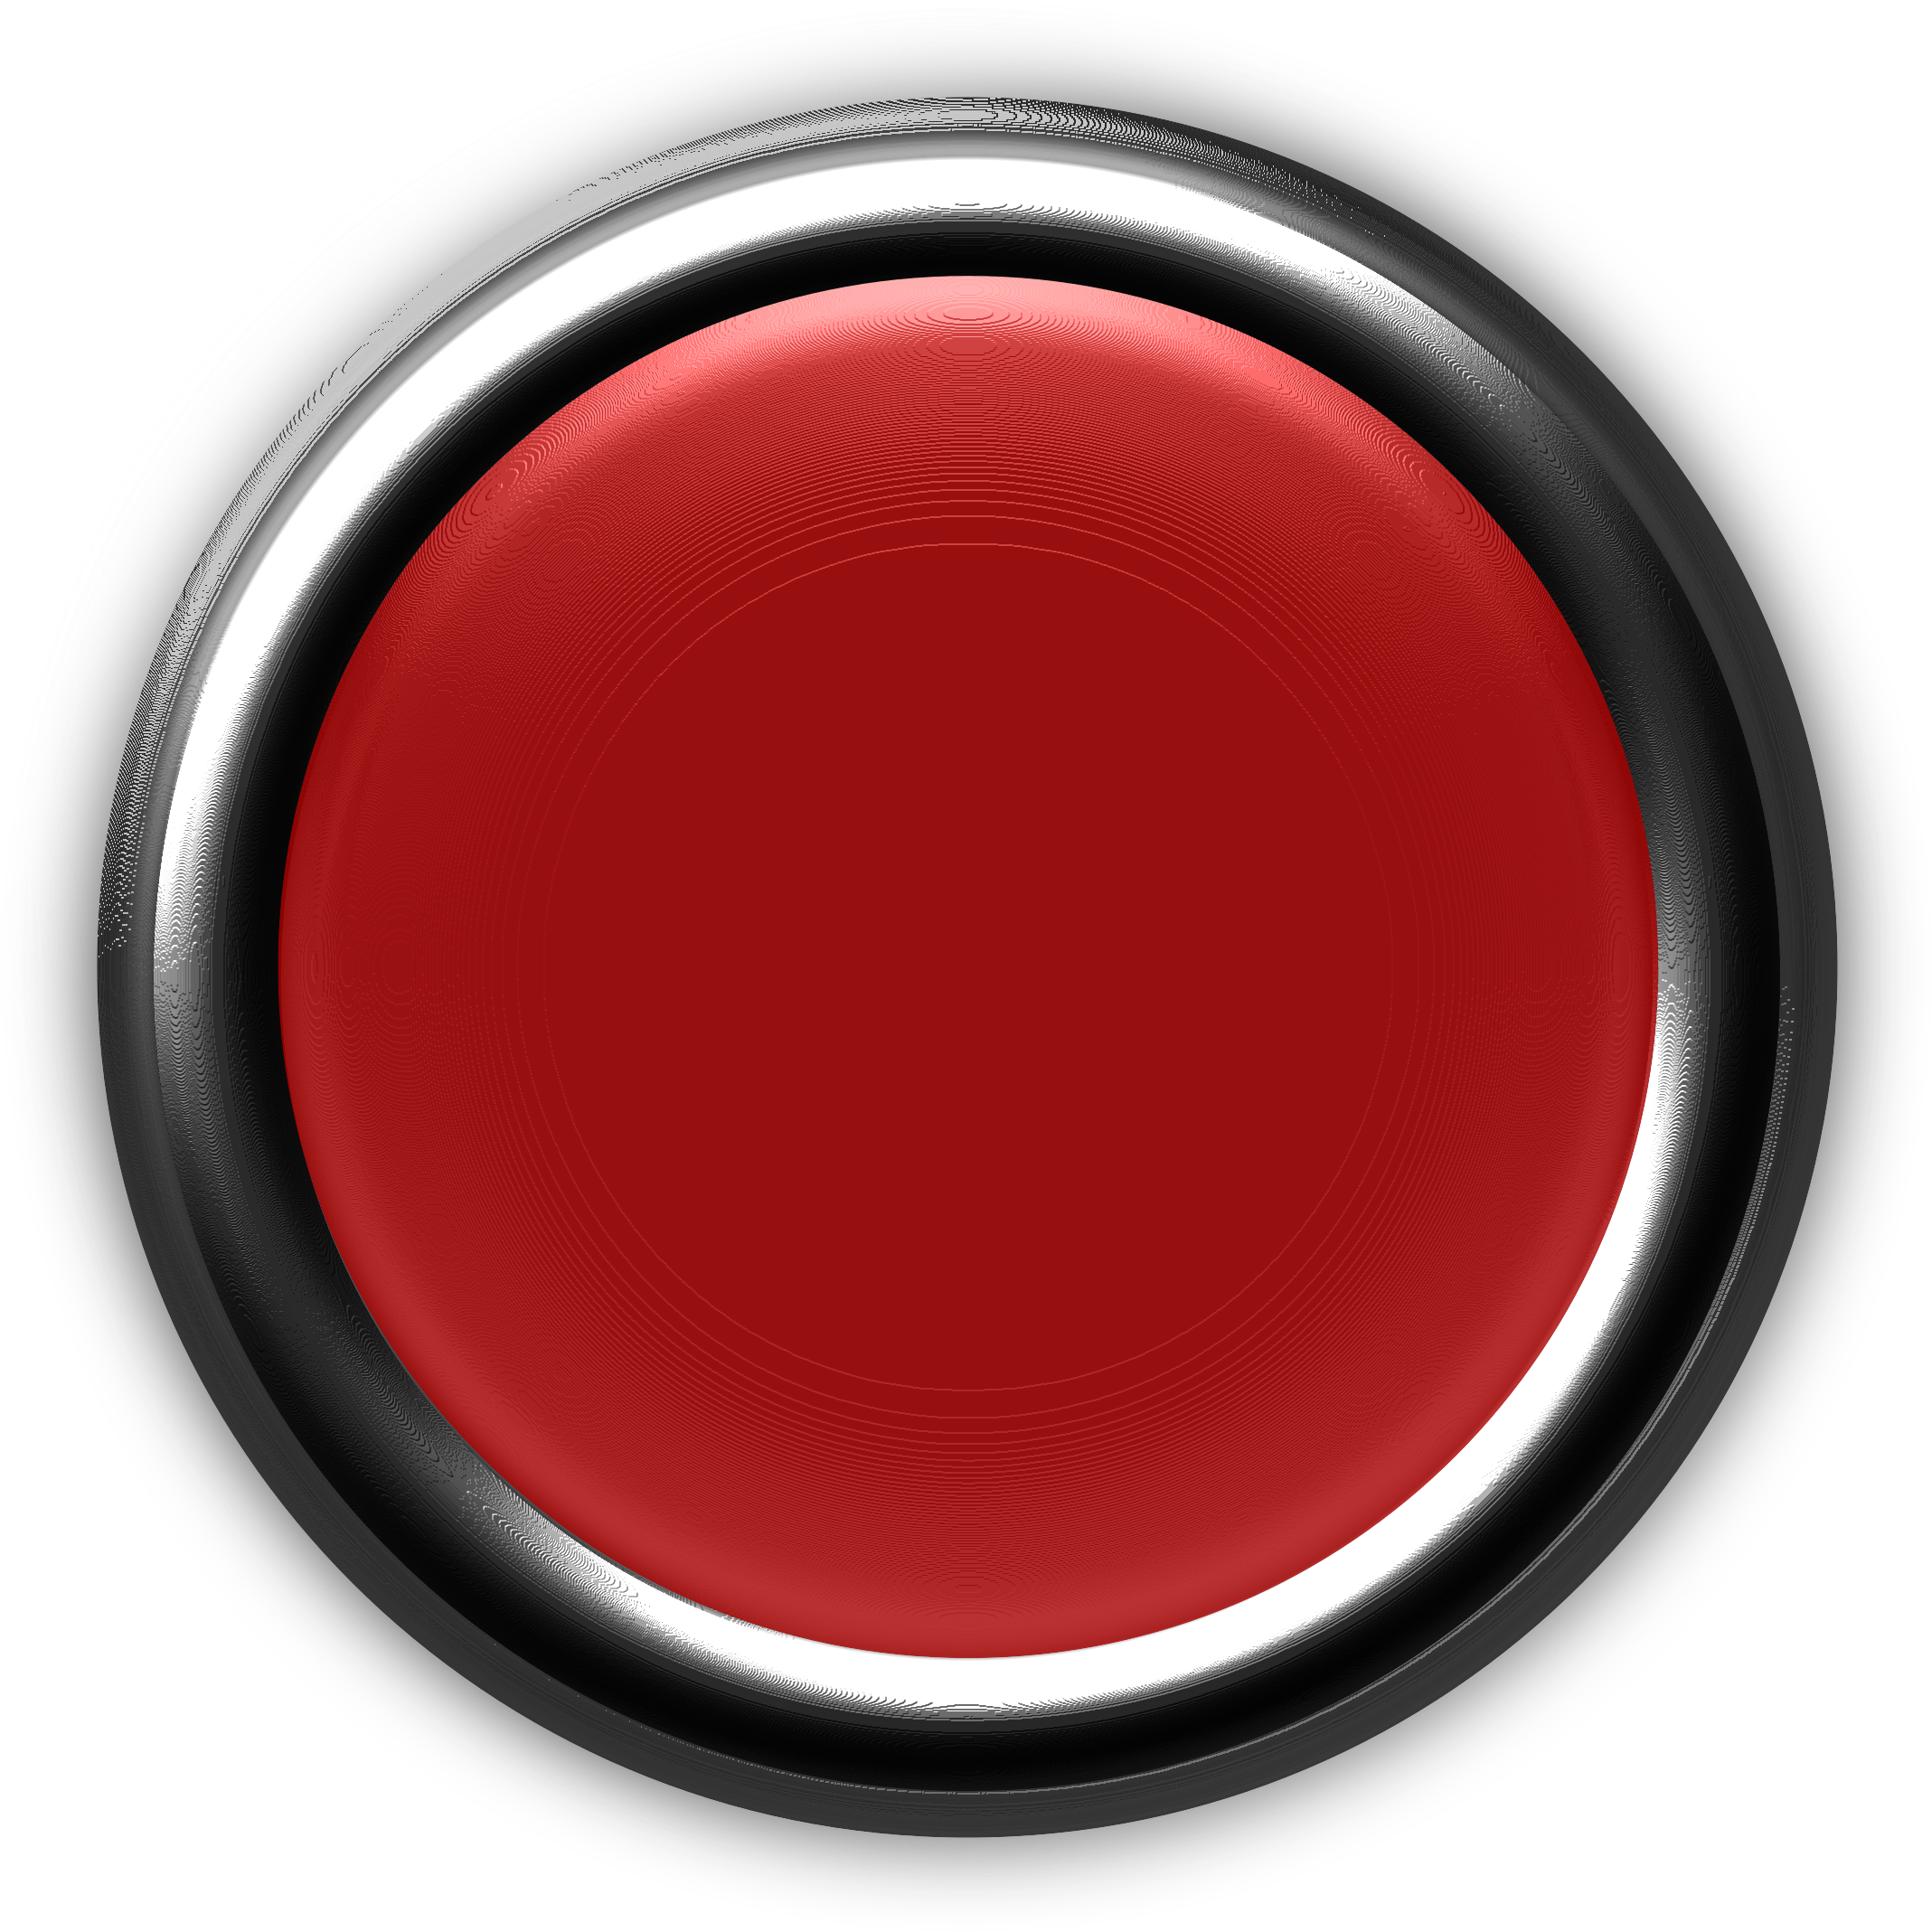 Button With Internal Light Turned Off - Red Button Icon Png (2400x2400)